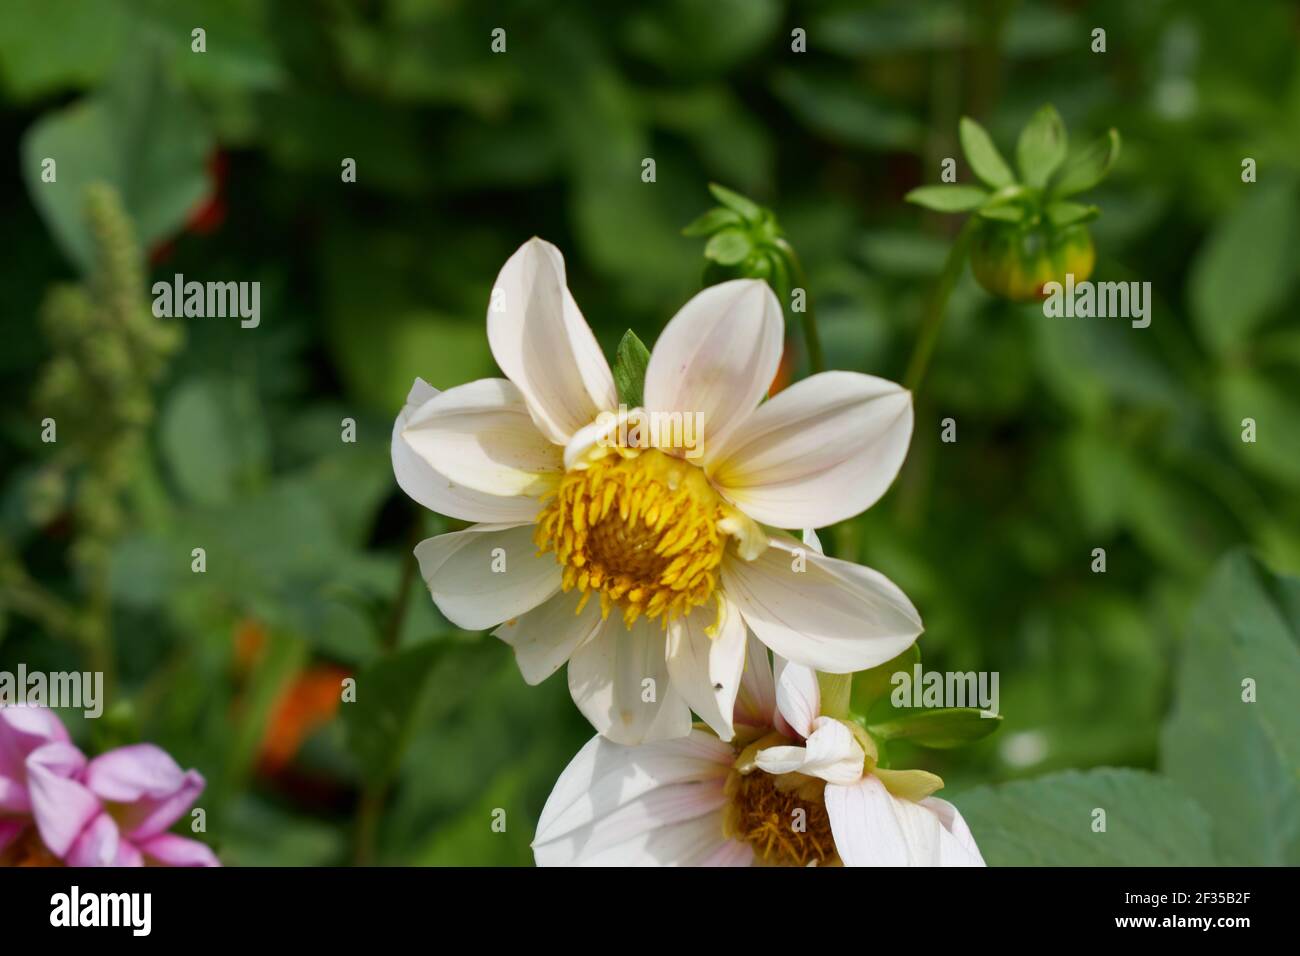 Flower with soft white petals Stock Photo